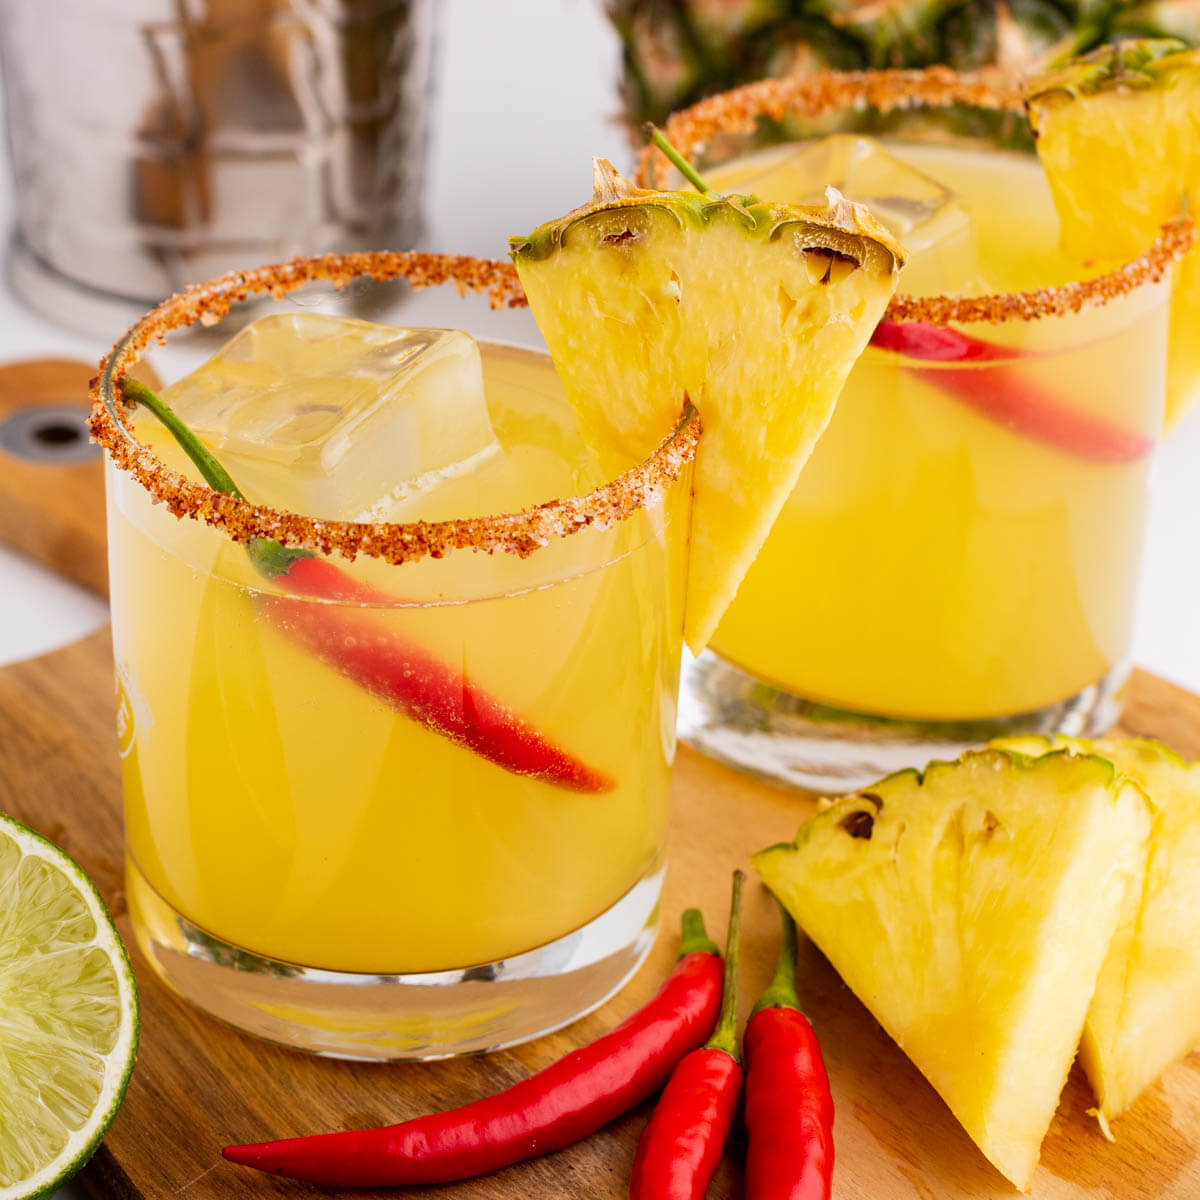 Two Spicy Pineapple Margaritas in red rimmed rocks glasses garnished with a wedge of pineapple and red chili pepper.